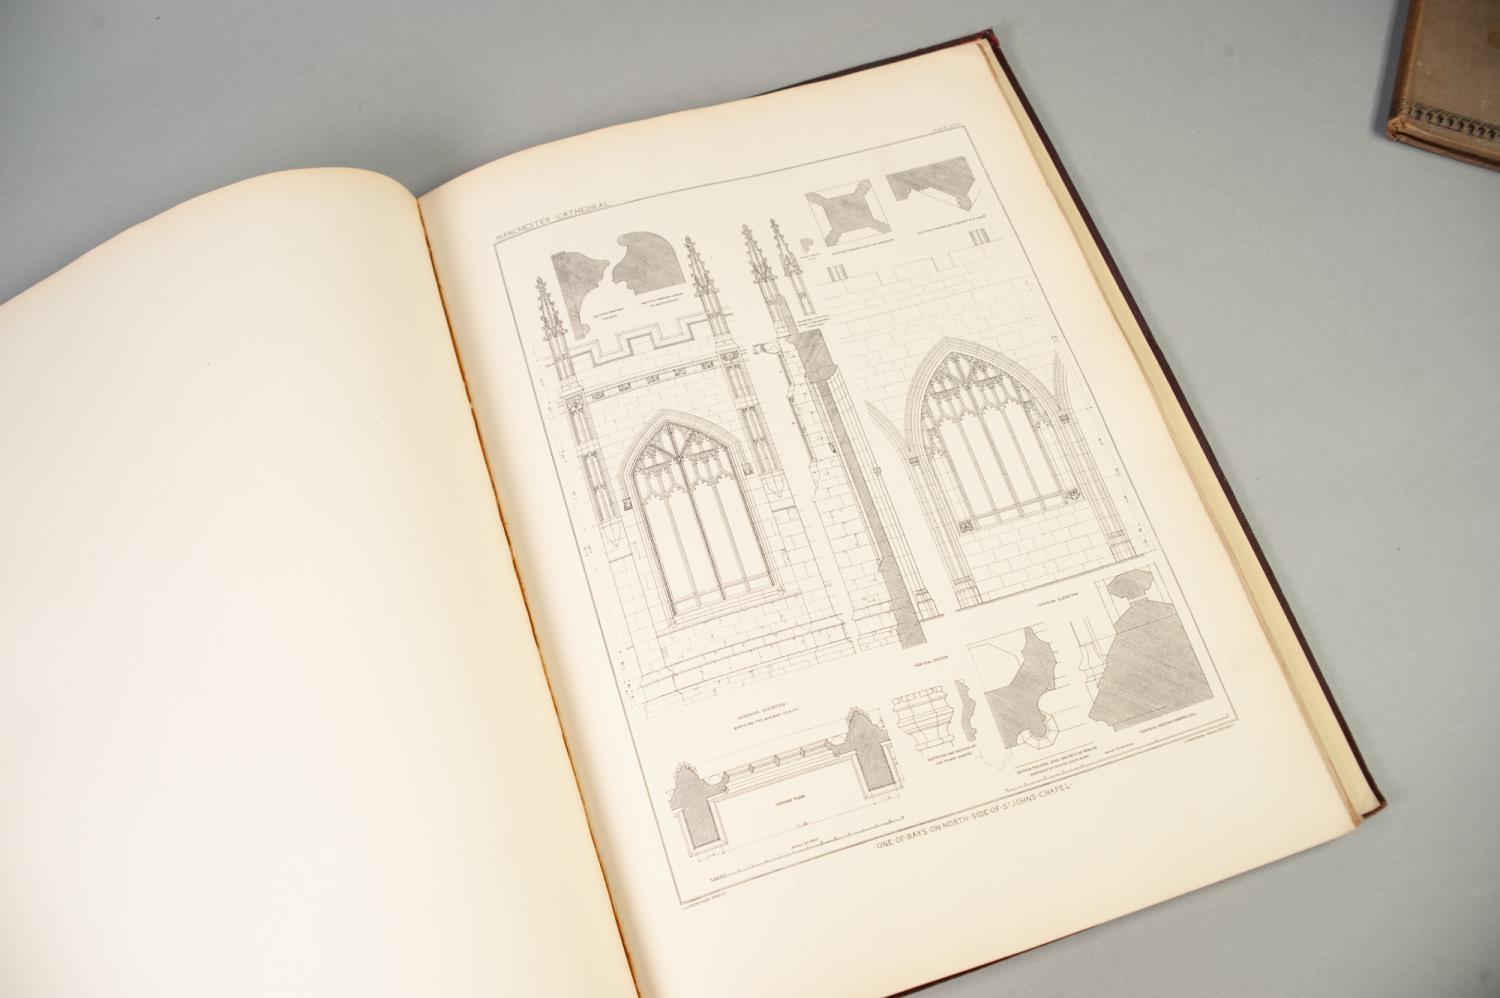 CROWTHER, AN ARCHITECUTRAL HISTORY OF THE CATHEDRAL CHURCH OF MANCHESTER, edited by F Renaud, - Image 4 of 6